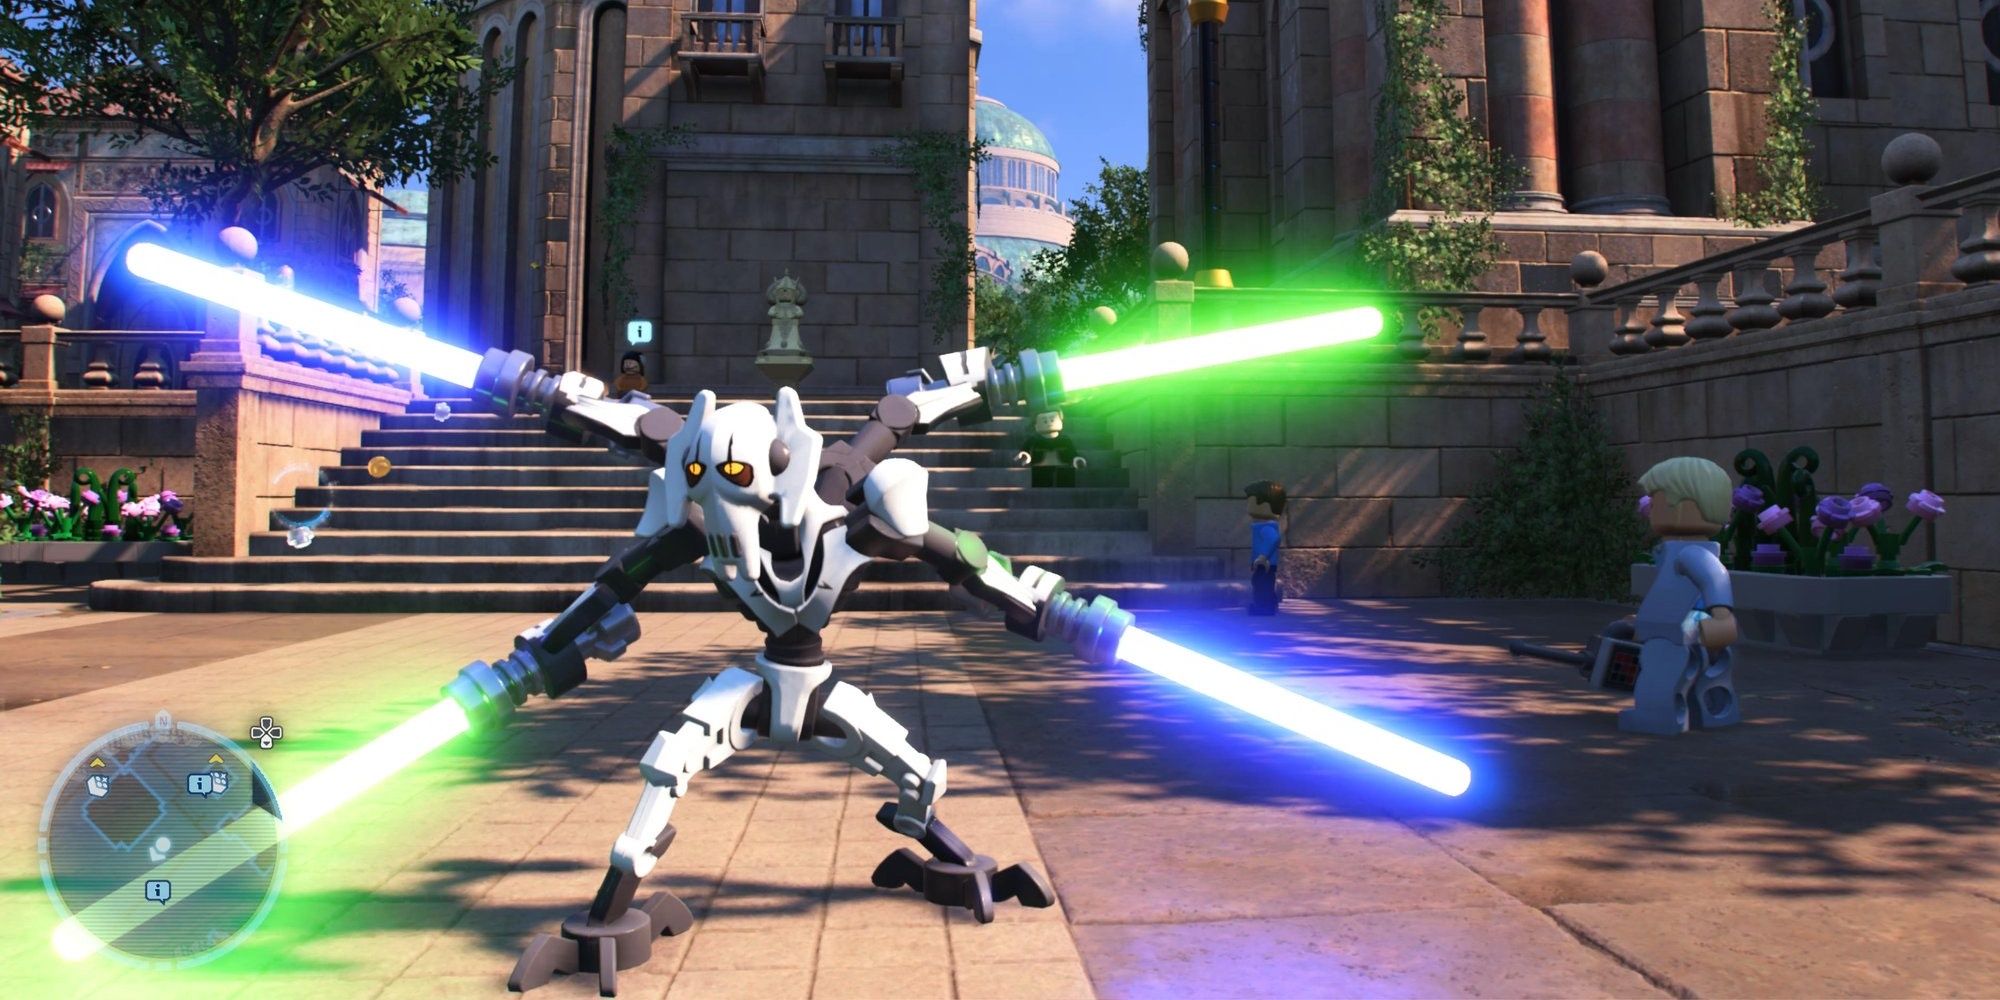 General Grievous With 4 Lightsabers, 2 Blue, 2 Green